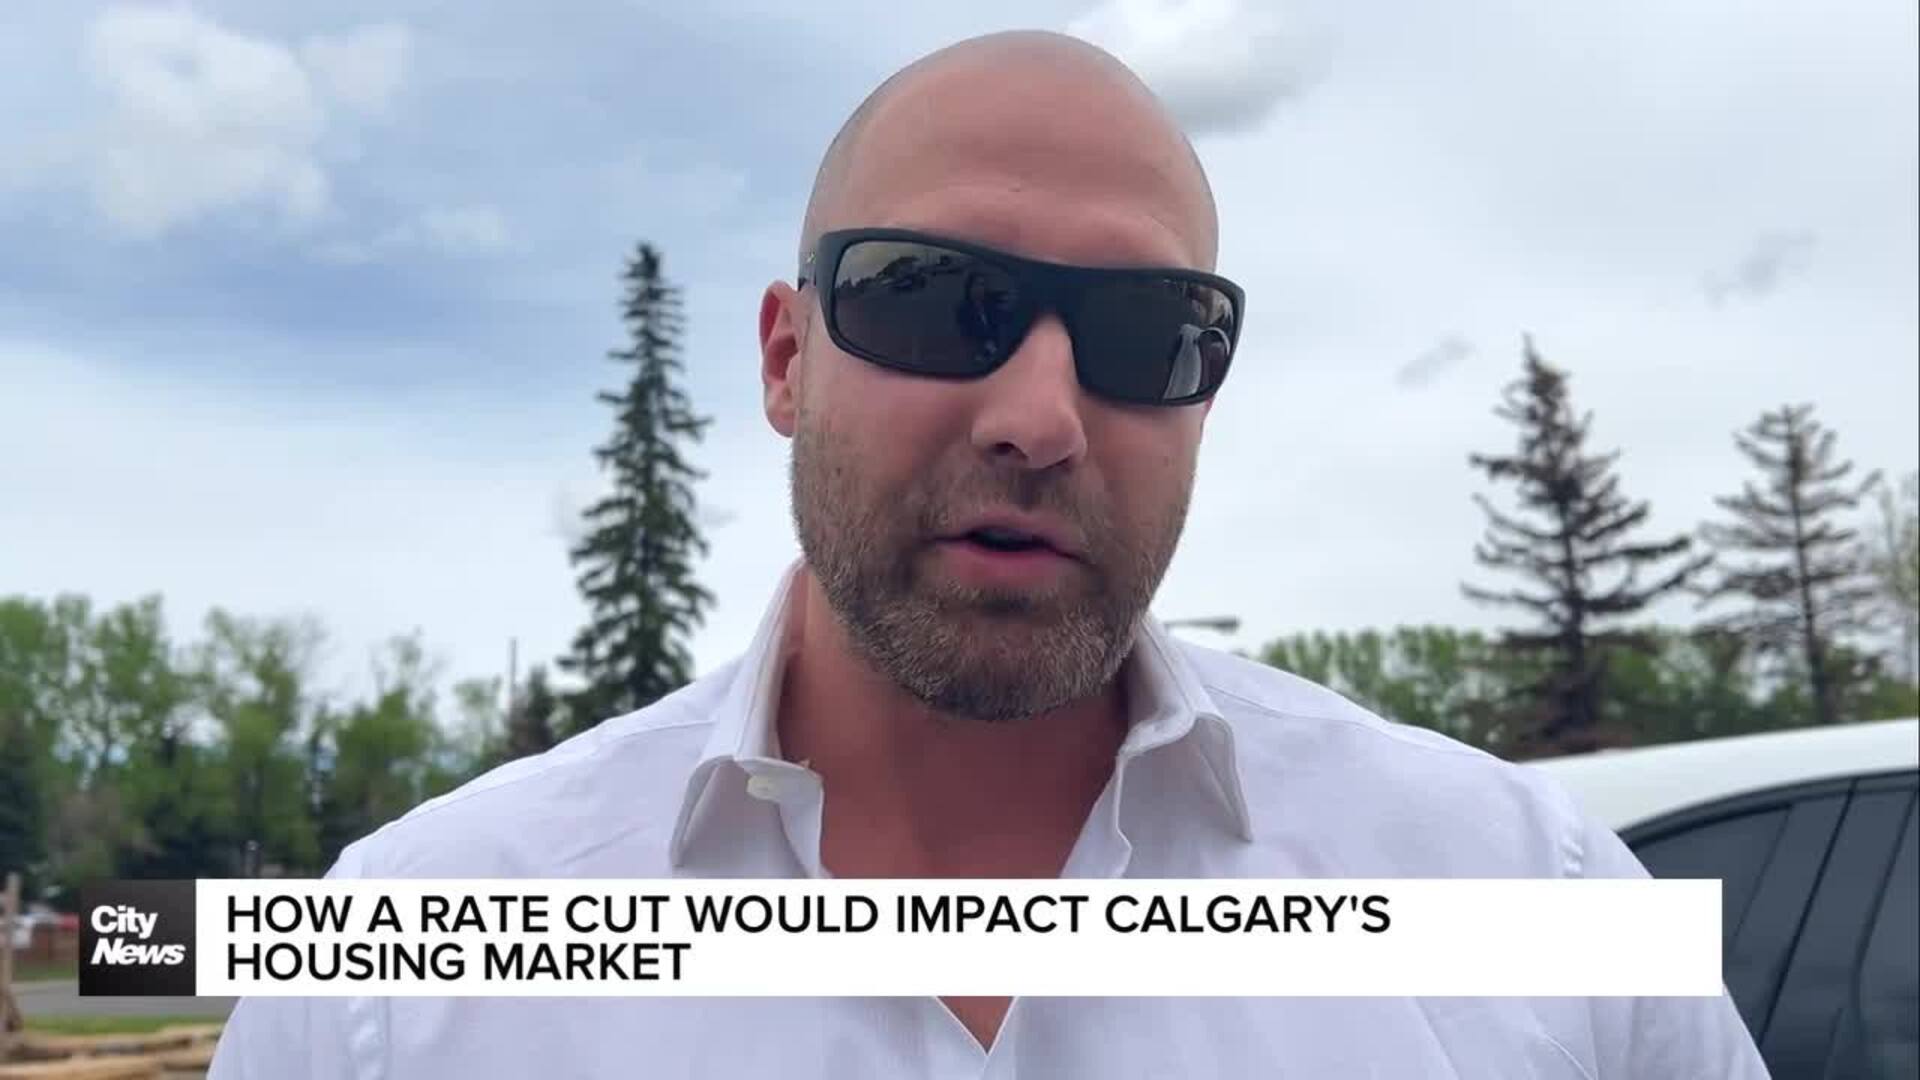 How a rate cut could impact Calgary’s housing market